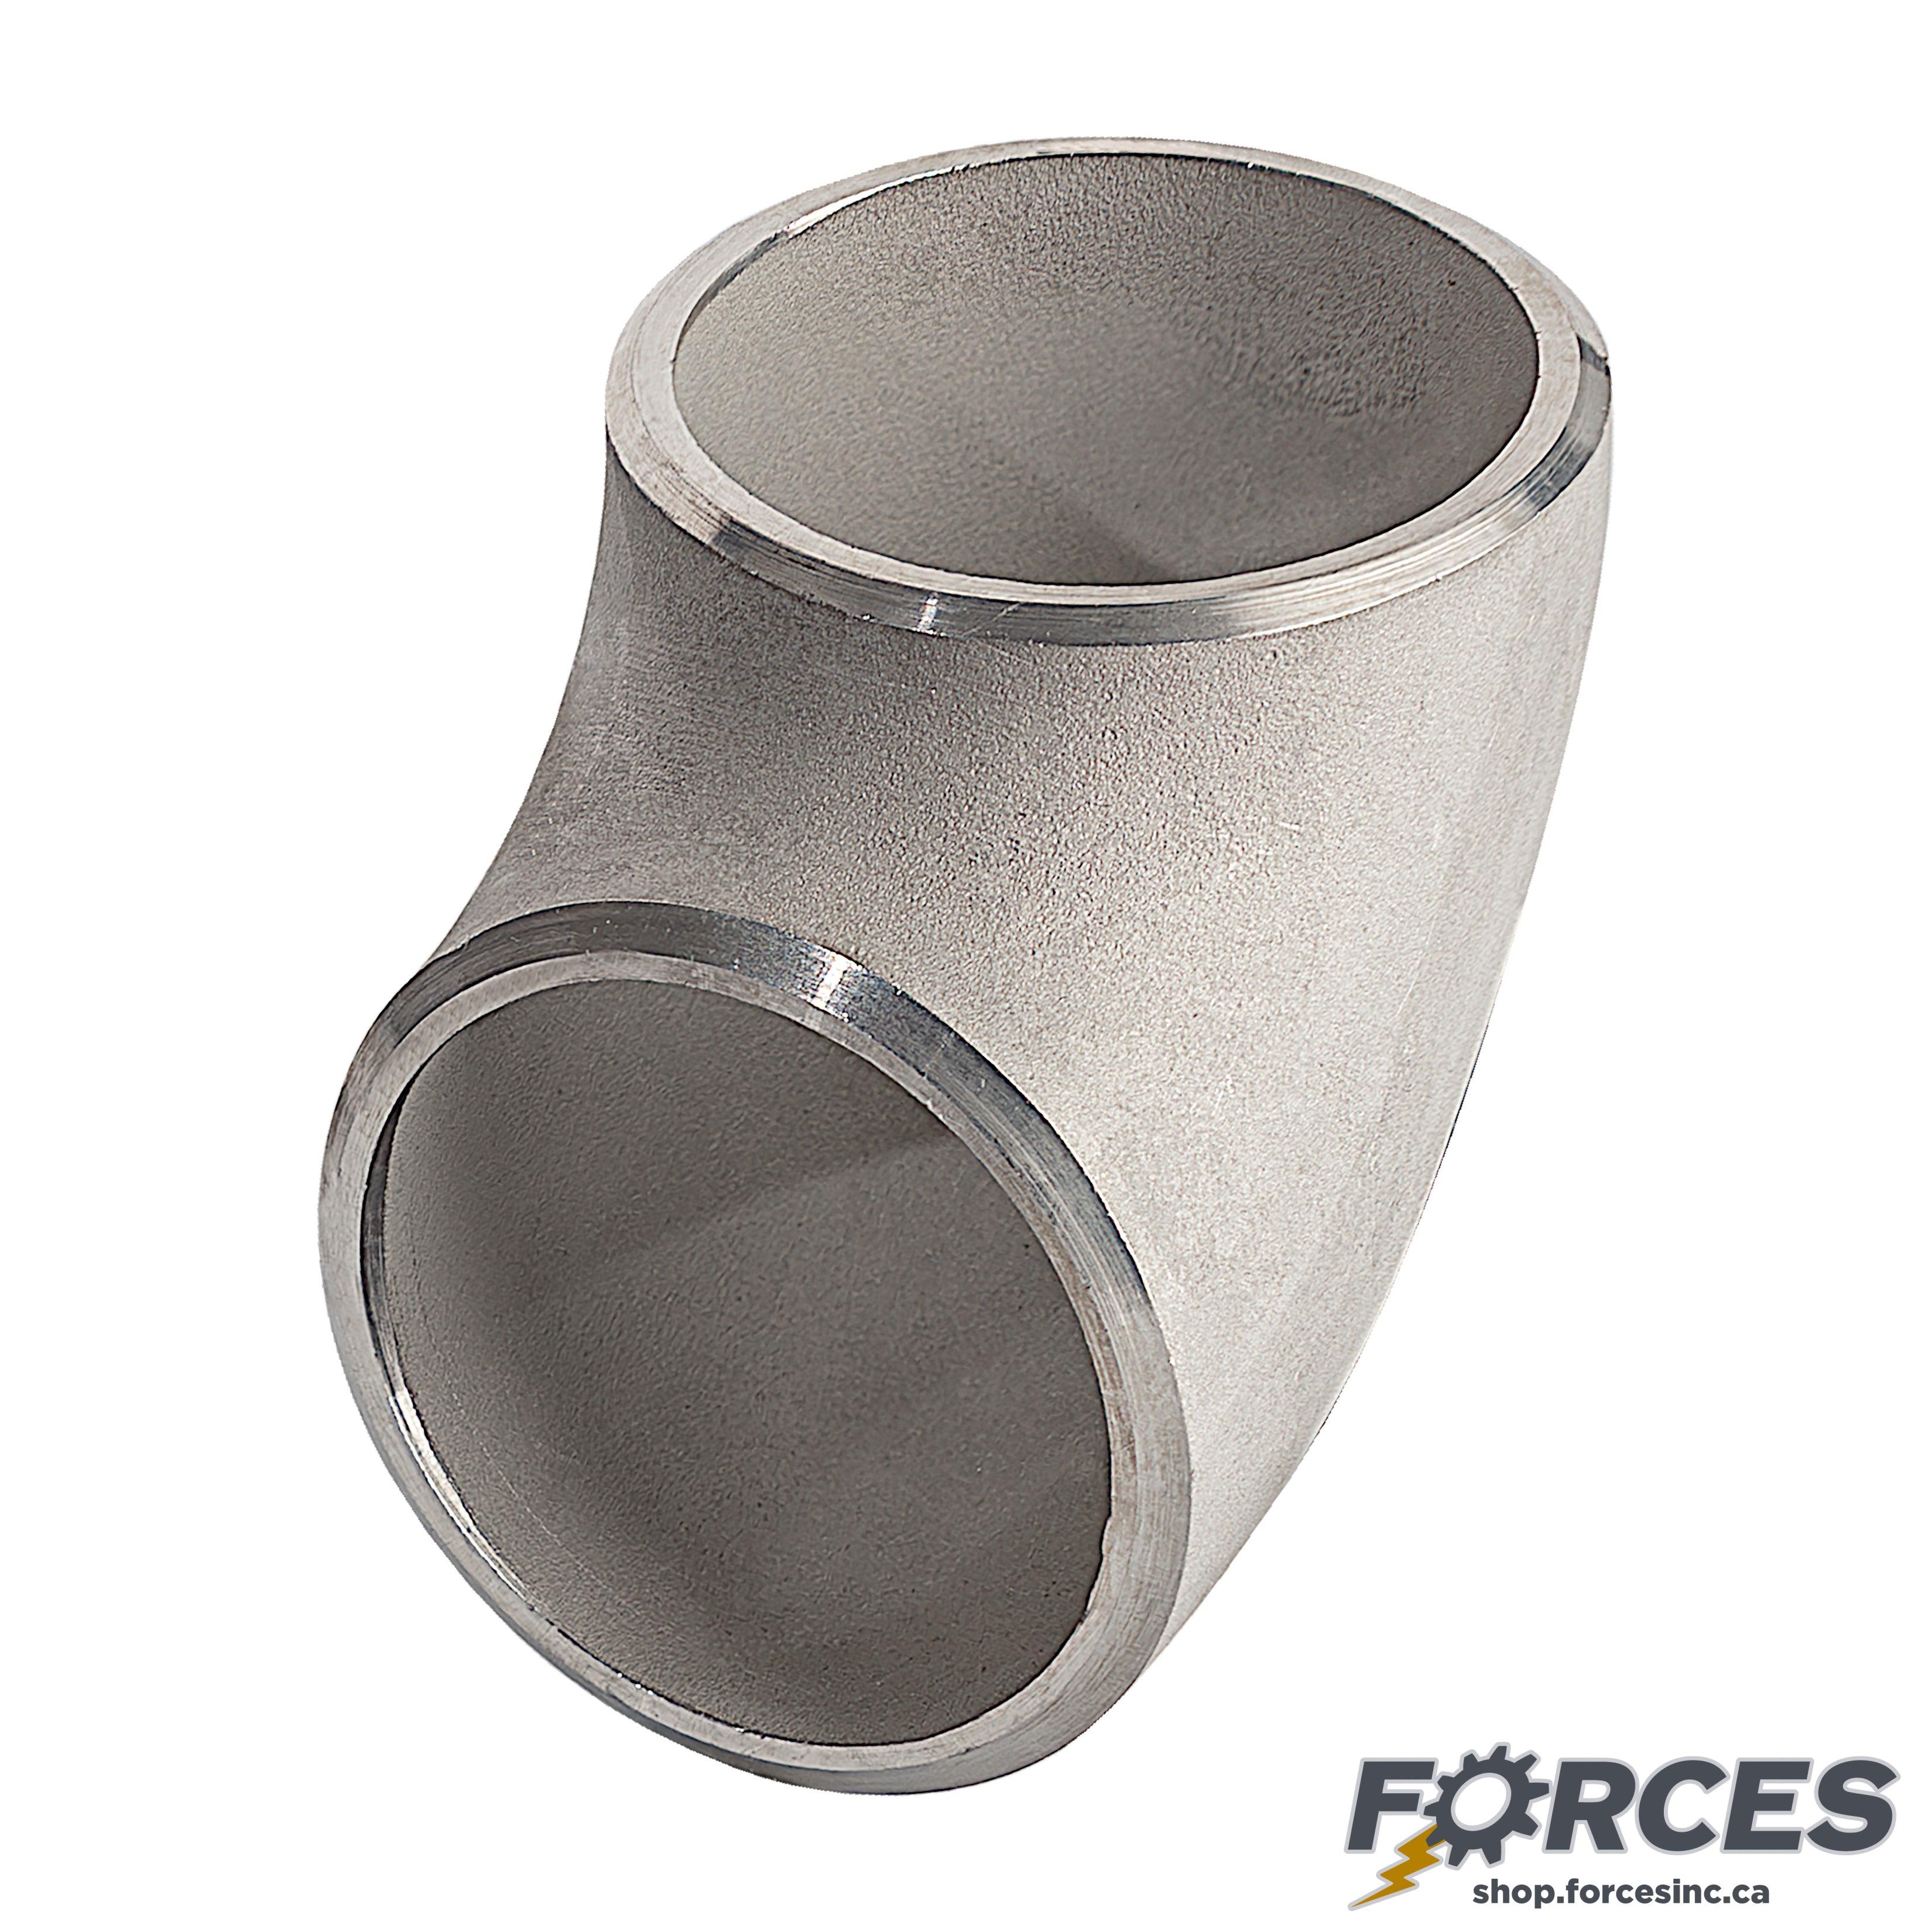 3/4" Elbow 45° SCH 40 Butt Weld - Stainless Steel 316 - Forces Inc